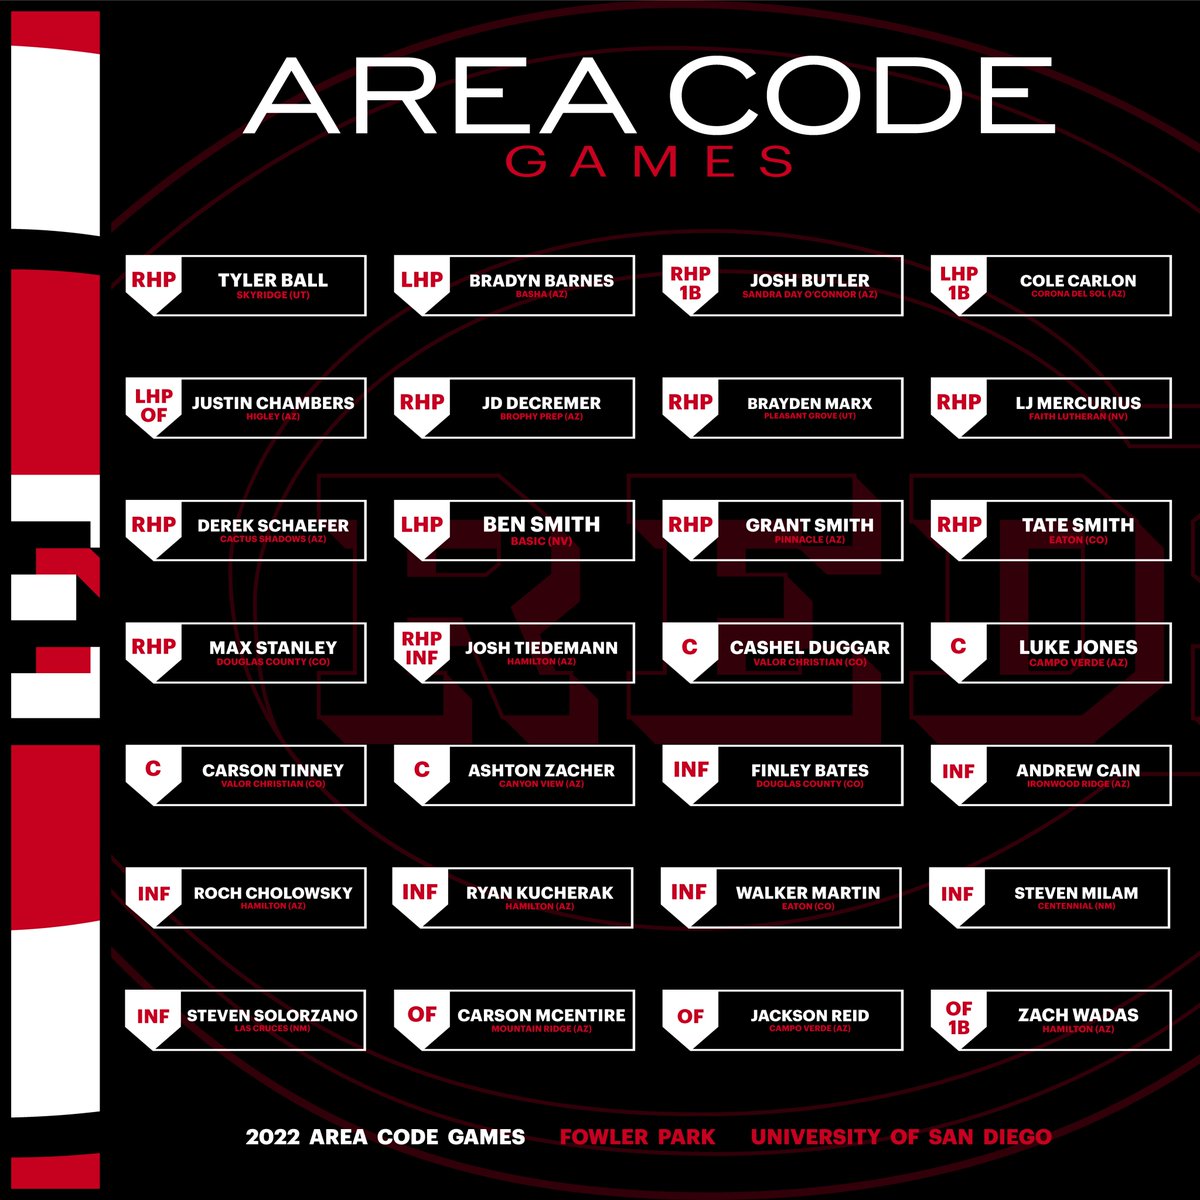 Representing the Southwest... The @Reds 2022 Area Code Games Roster #ACGames22